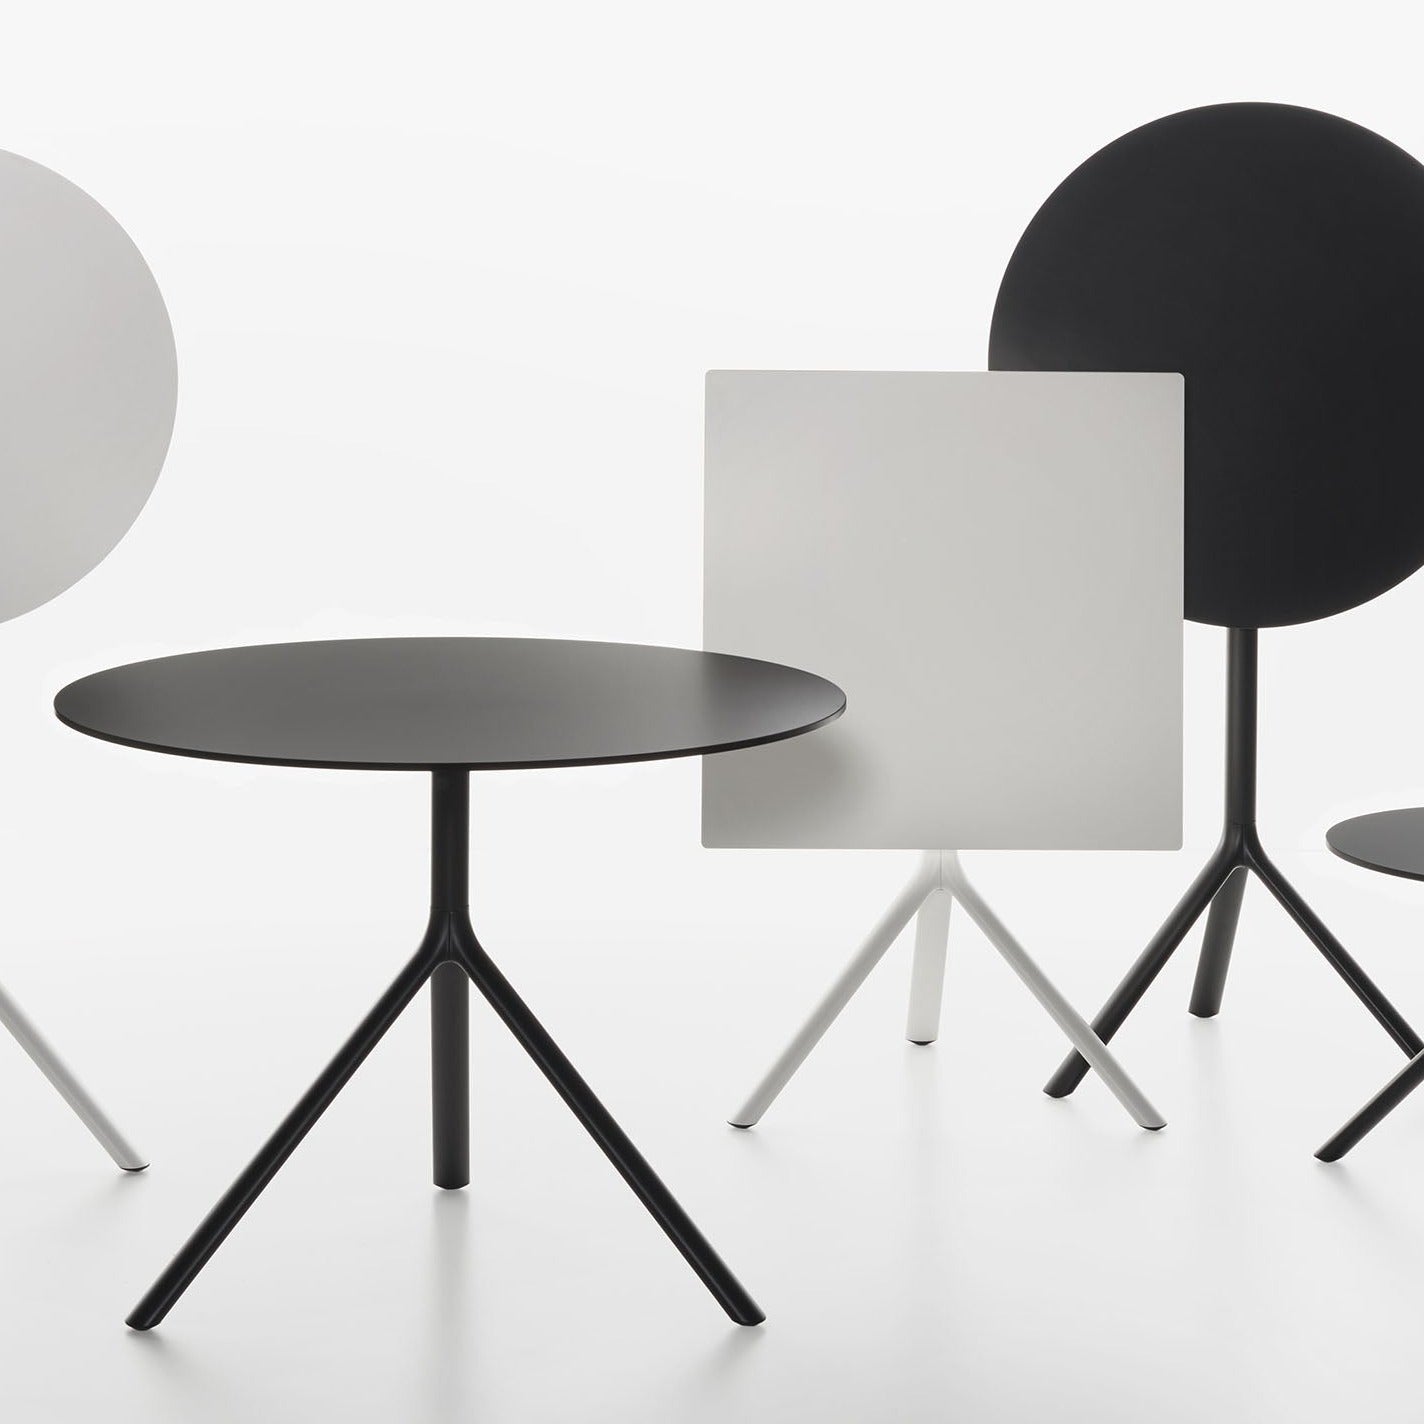 MIURA Table Collection